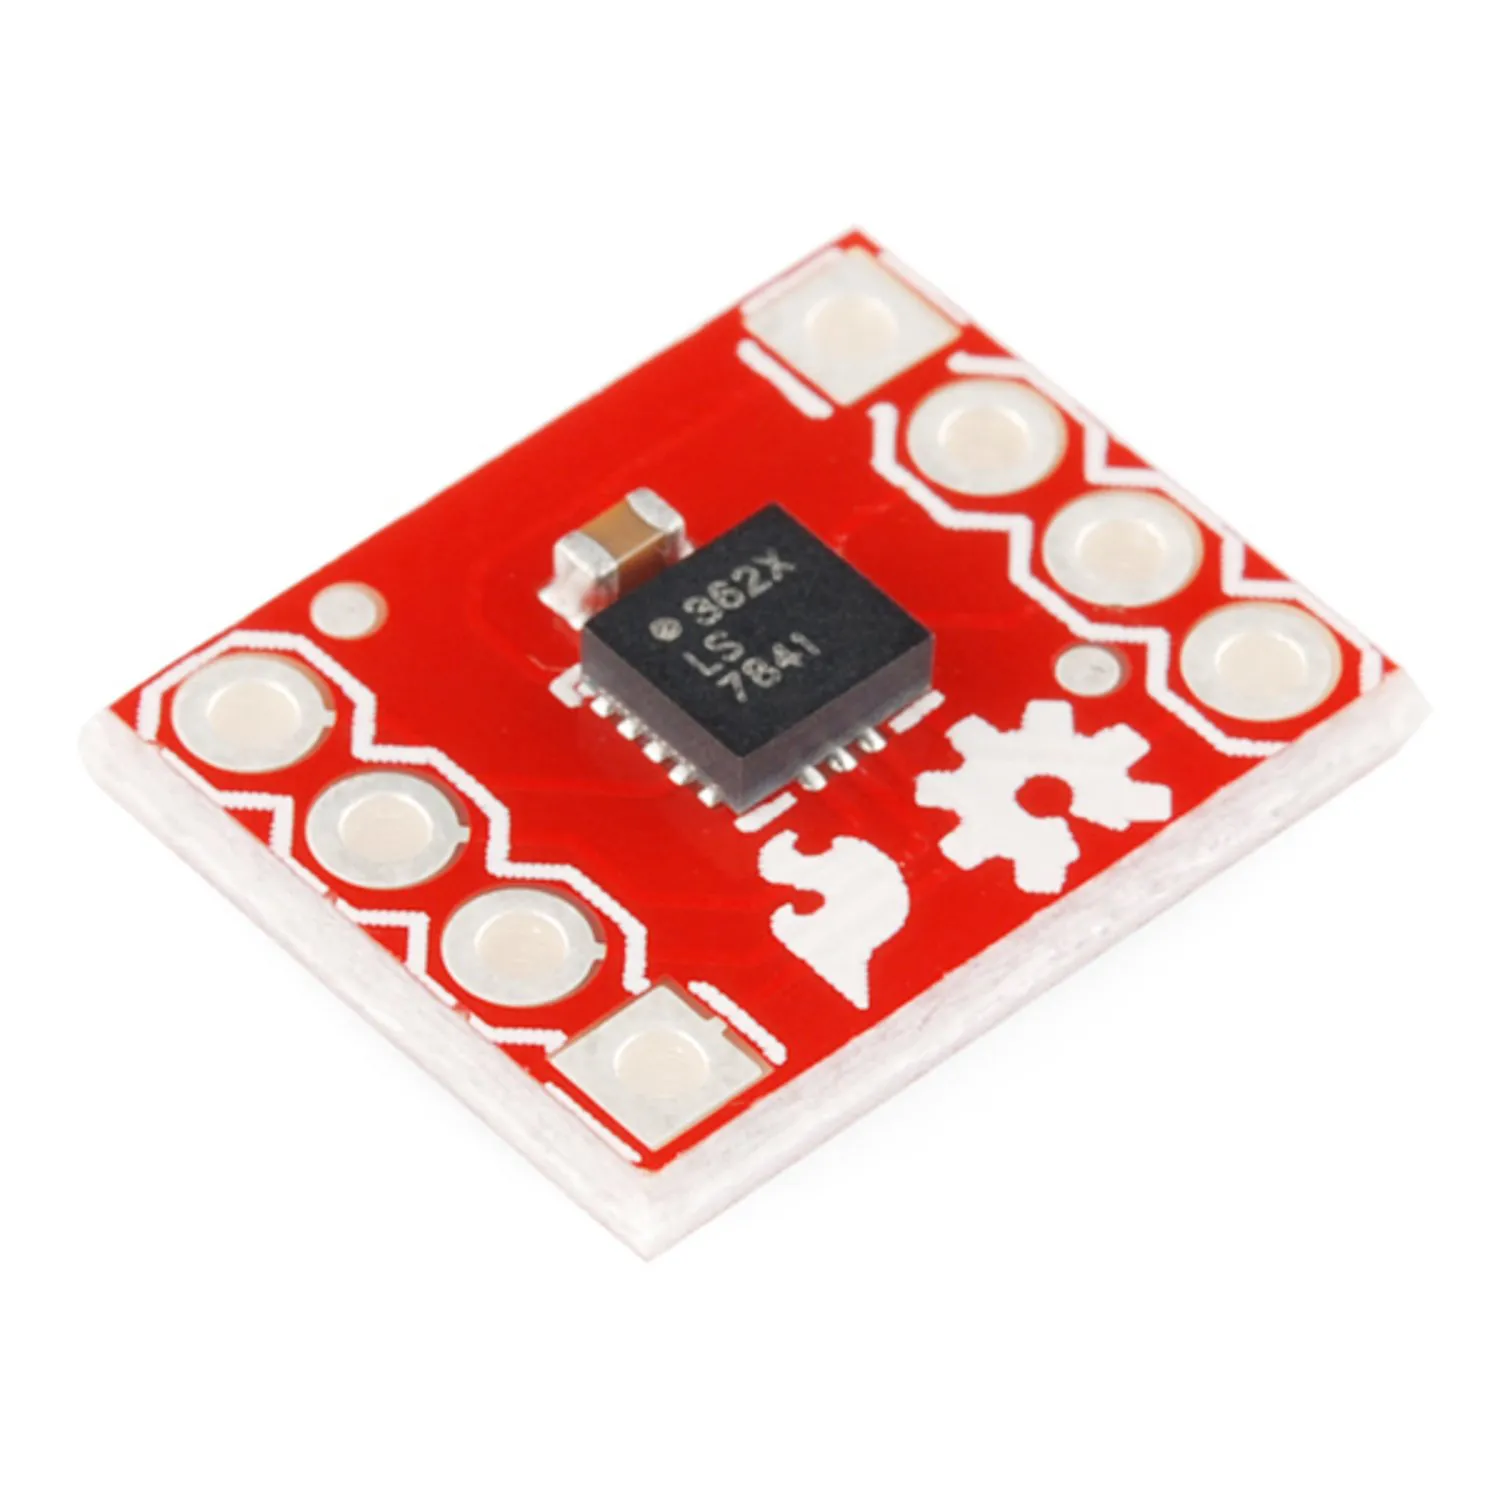 Photo of SparkFun Triple Axis Accelerometer Breakout - ADXL362